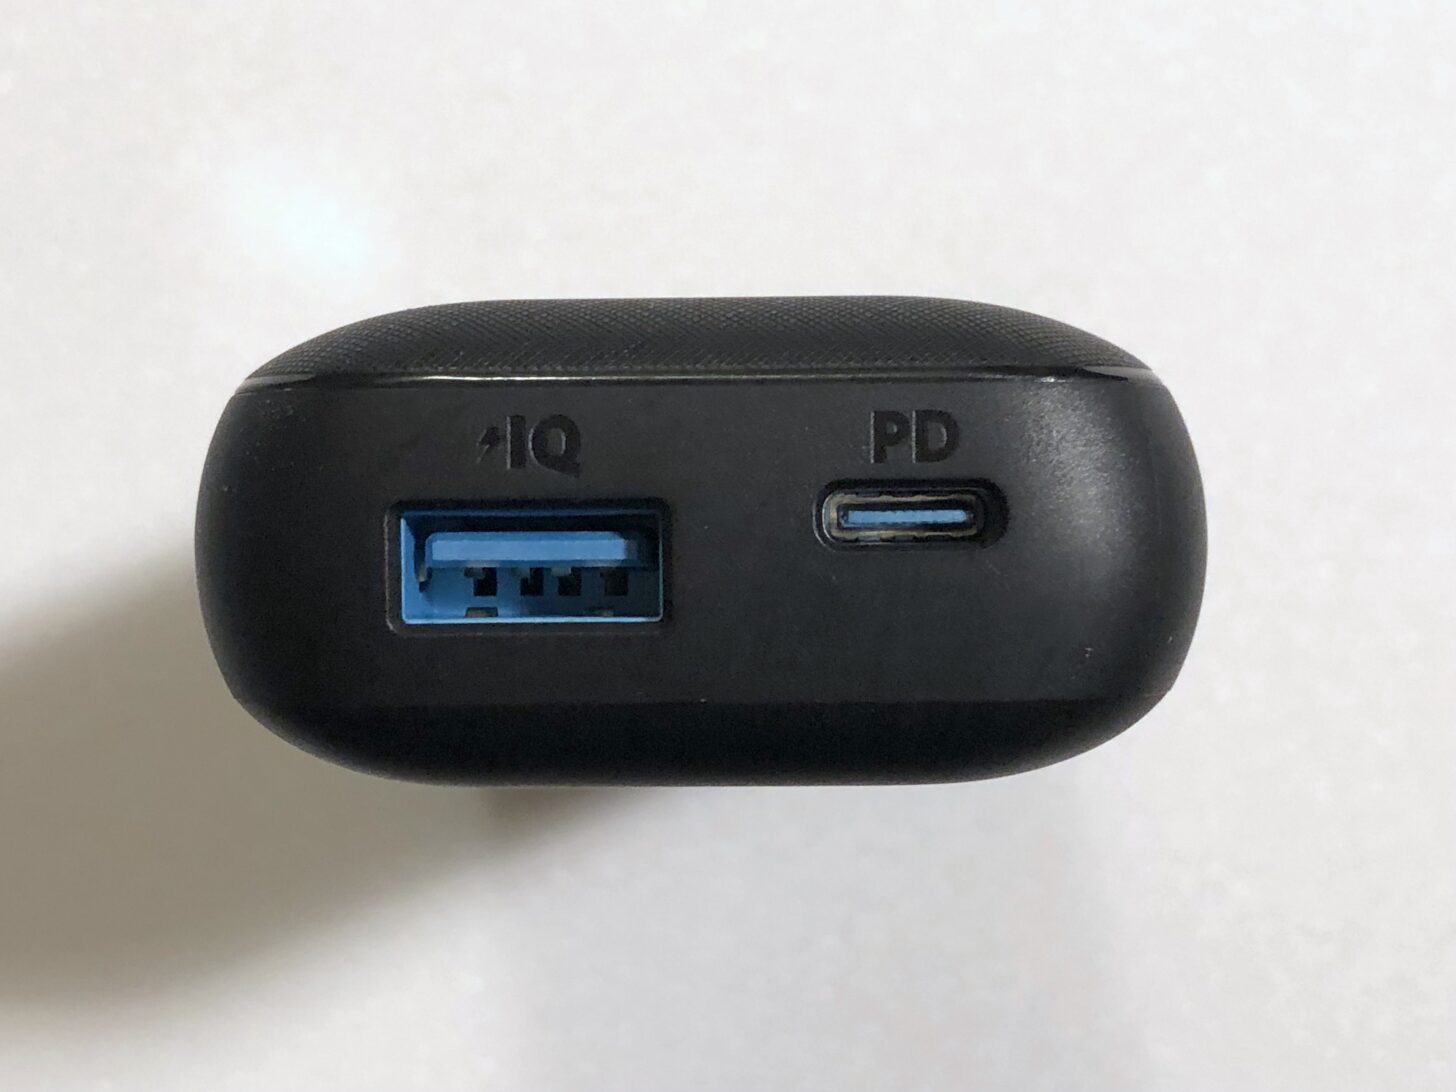 The Anker 10K showing the USB-A port (left) and USB-C port.